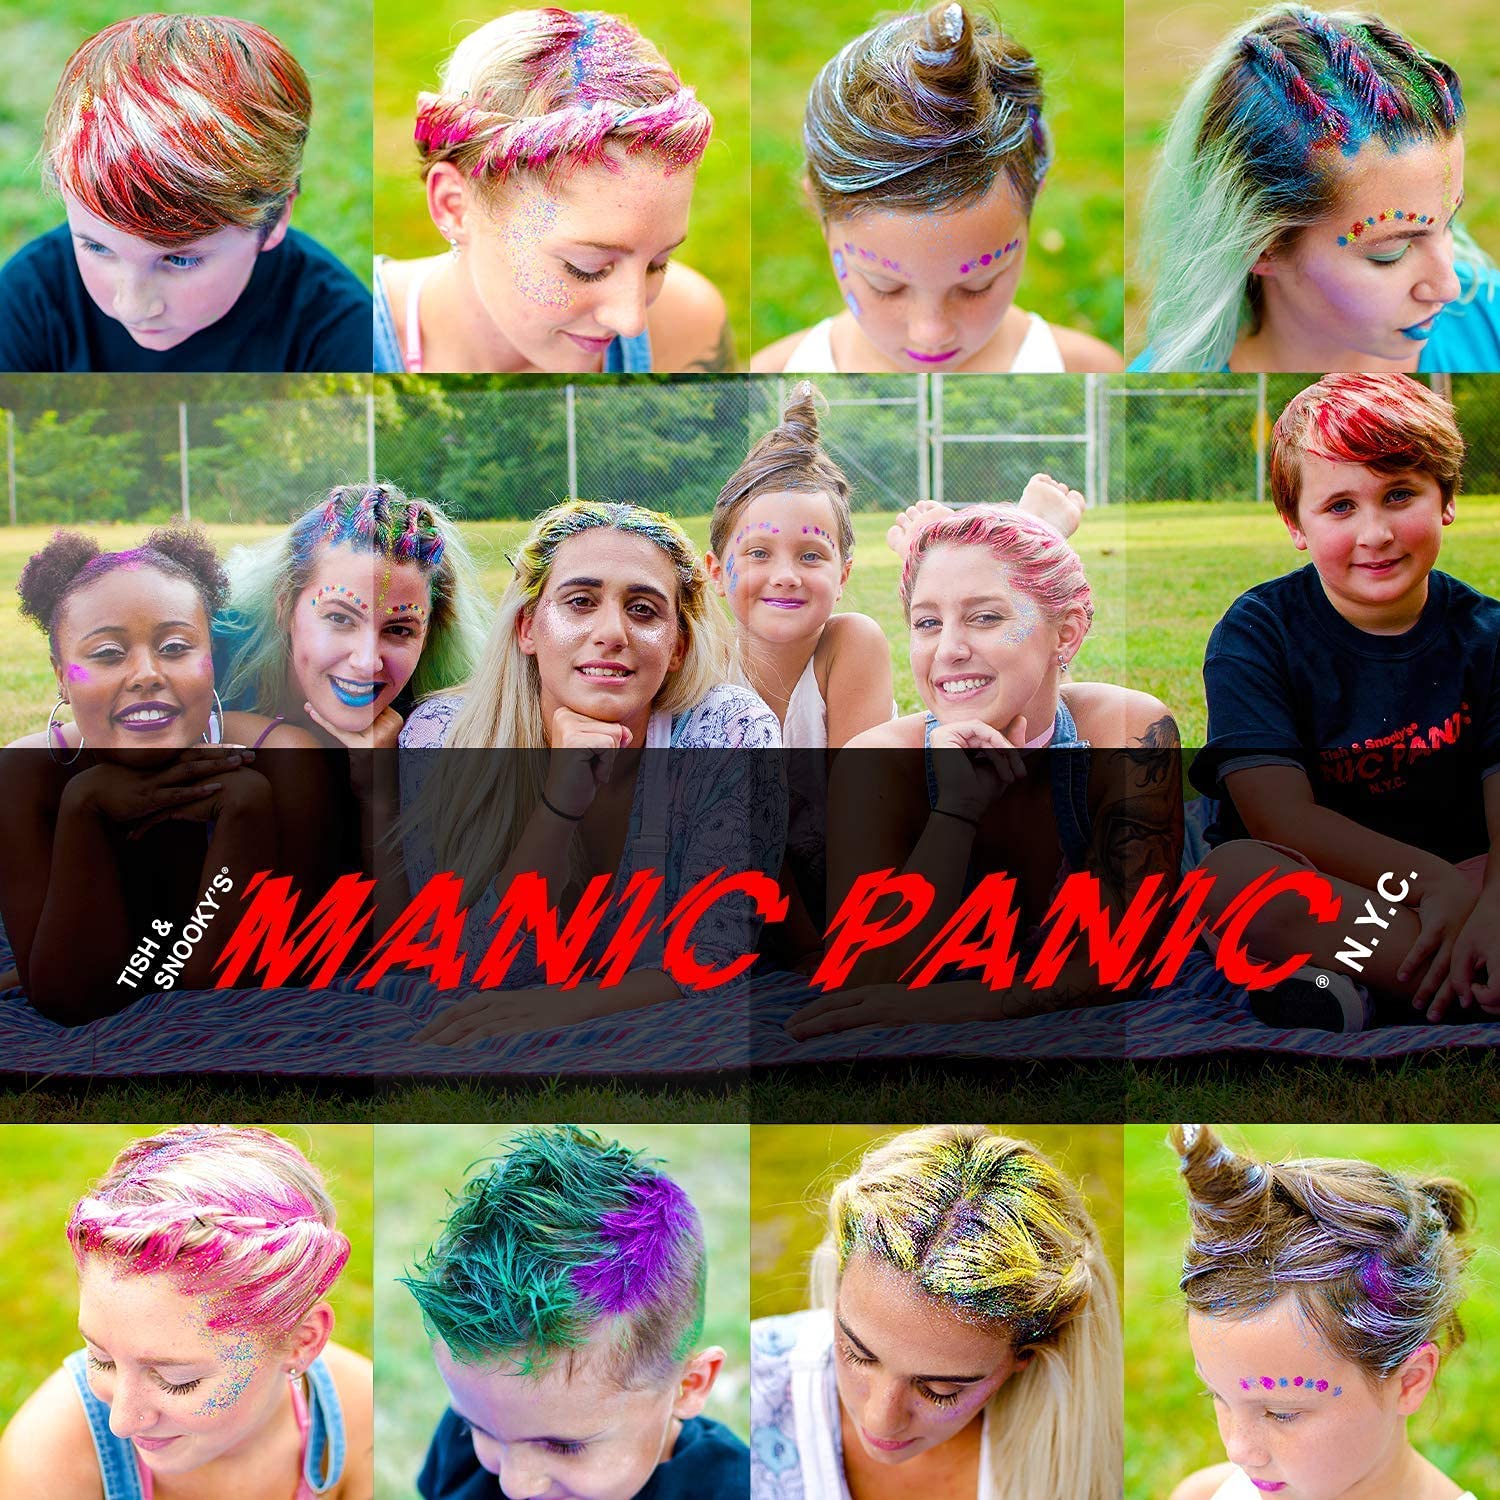 MANIC PANIC Raven Black Hair Color Gel - Dye Hard - Temporary Washable, Black Hair Styling Gel for Kids & Adults